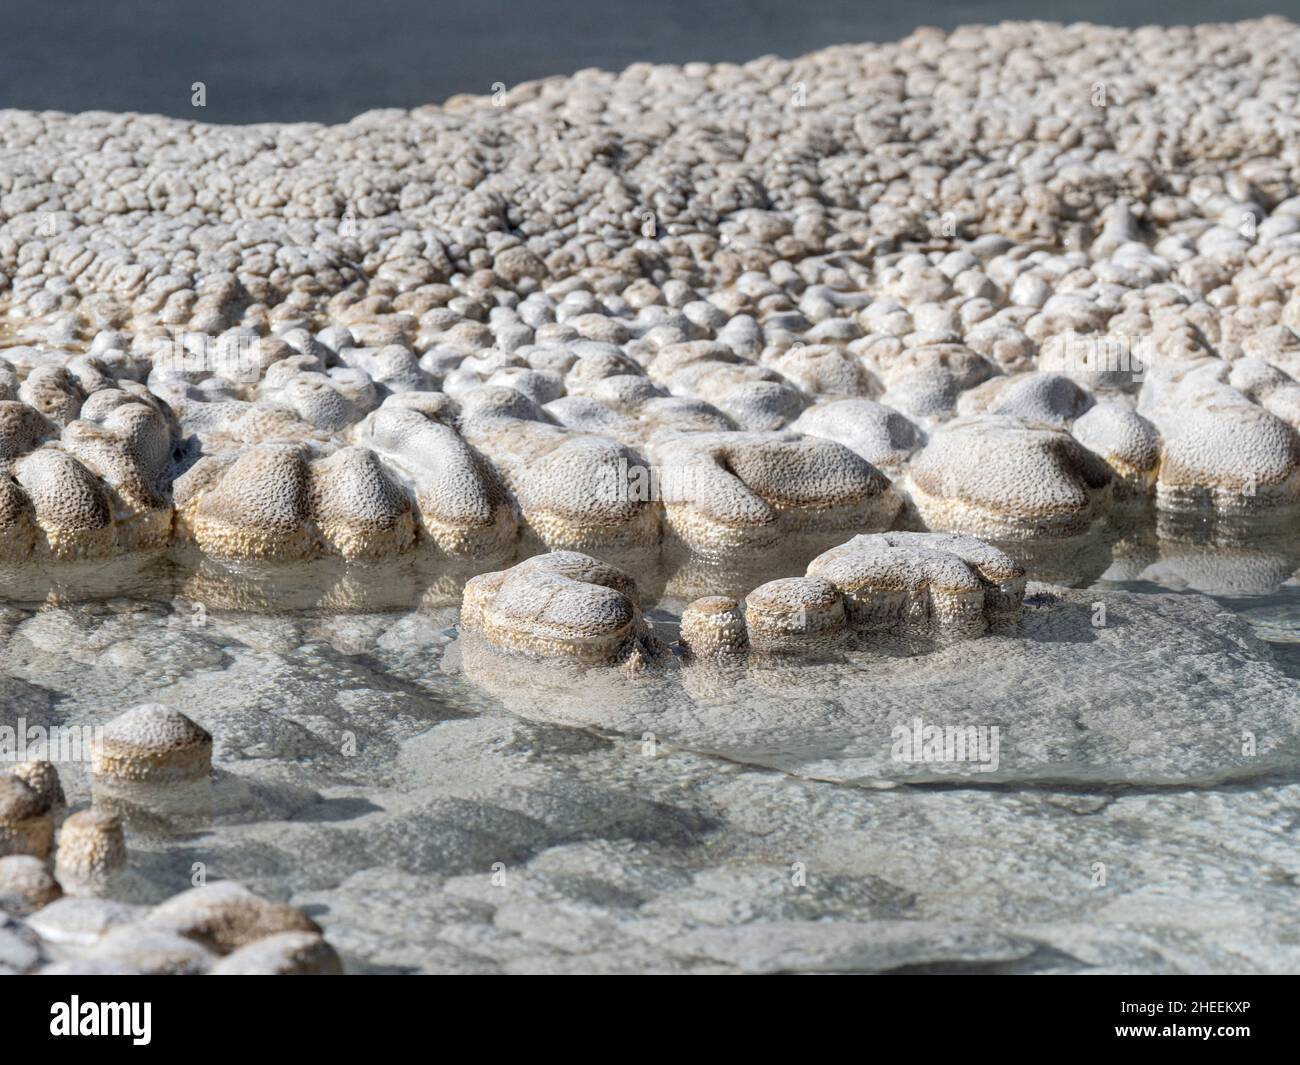 Detail of the Solitary Geyser, in the Norris Geyser Basin area, Yellowstone National Park, Wyoming, USA. Stock Photo